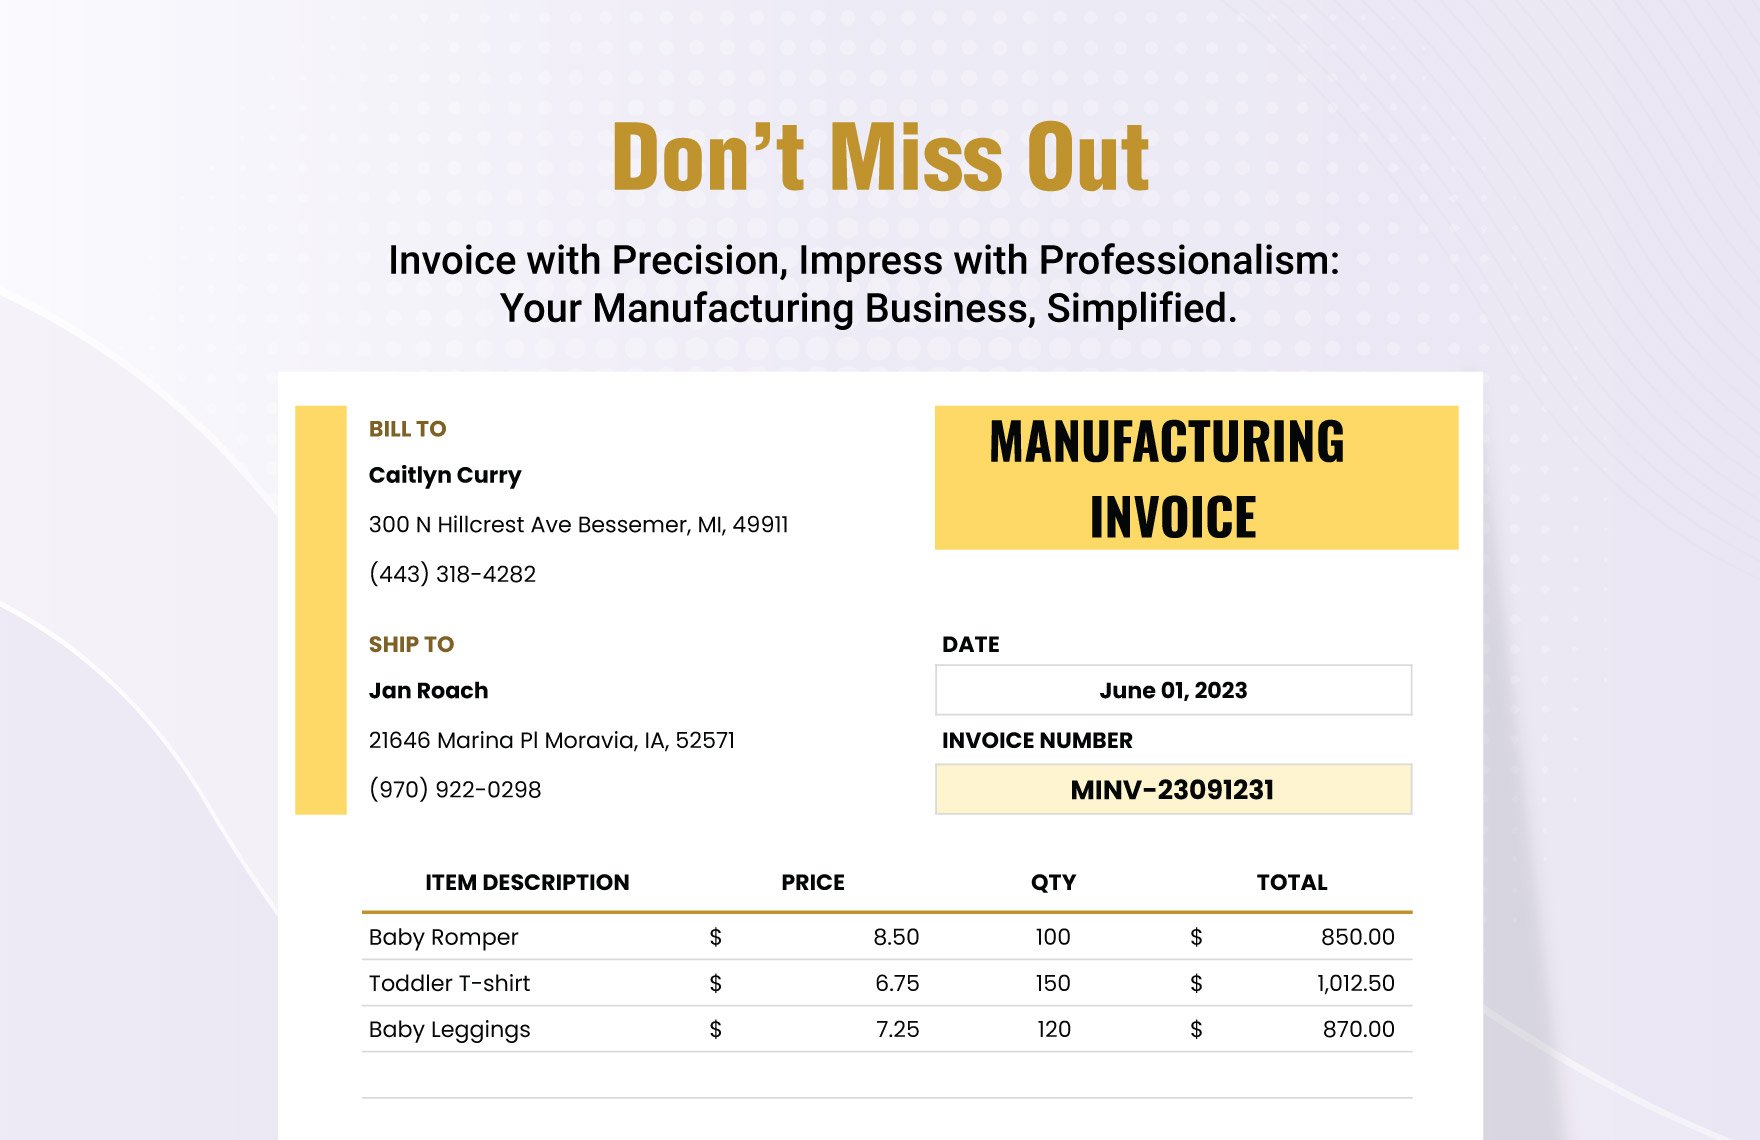 Manufacturing Invoice Template